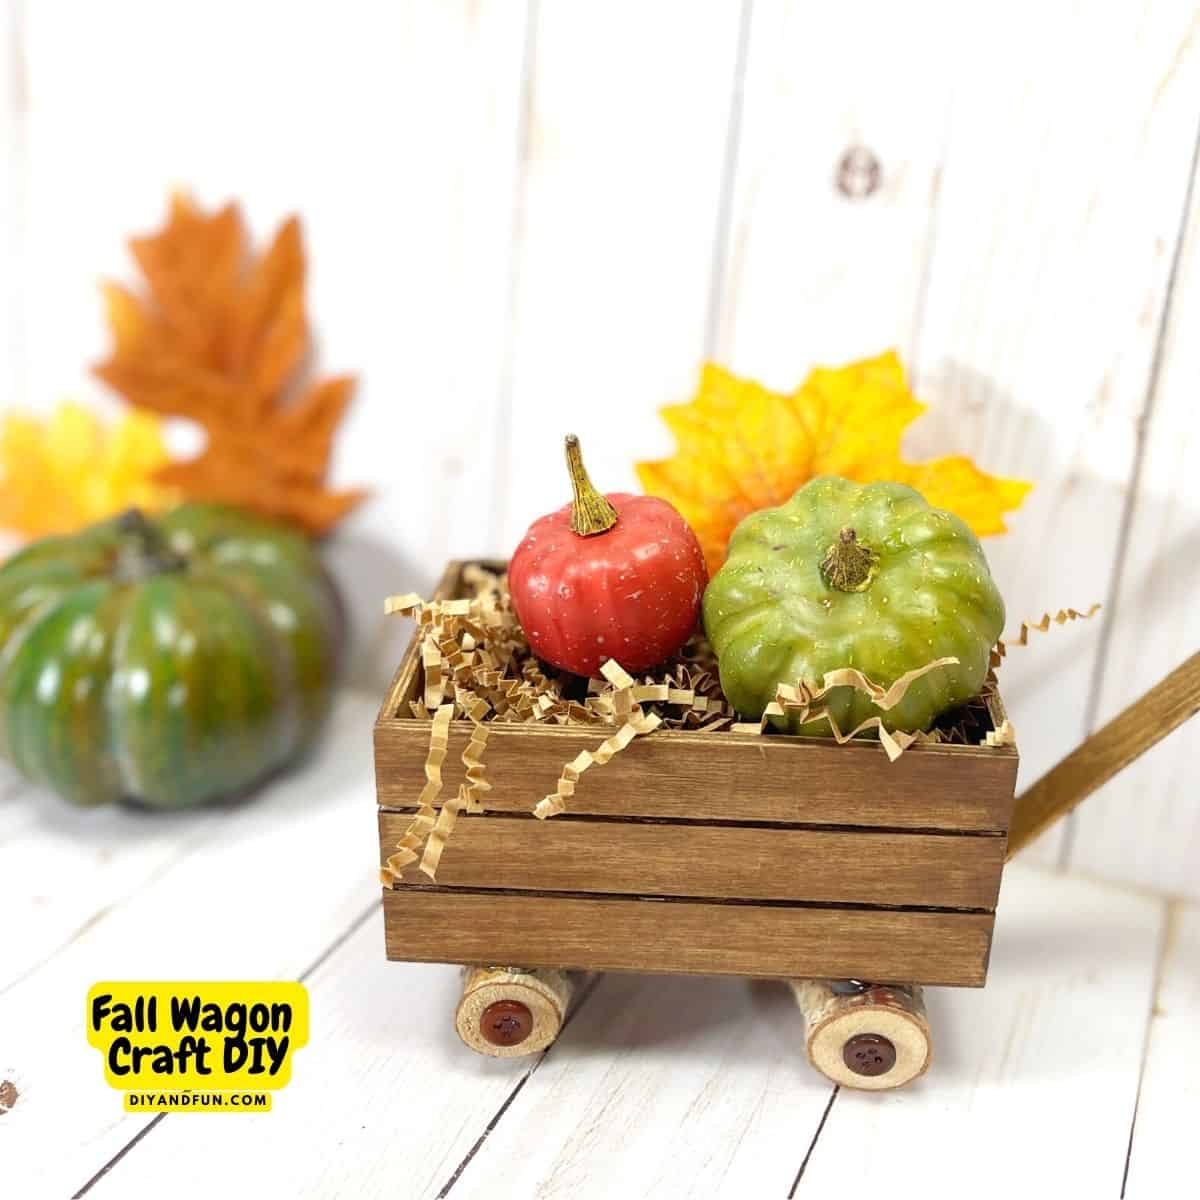 Fall Wagon Craft DIY, a simple and adorable do it yourself home decor project for turning a crate into a wagon. Dollar Store, Most Ages.